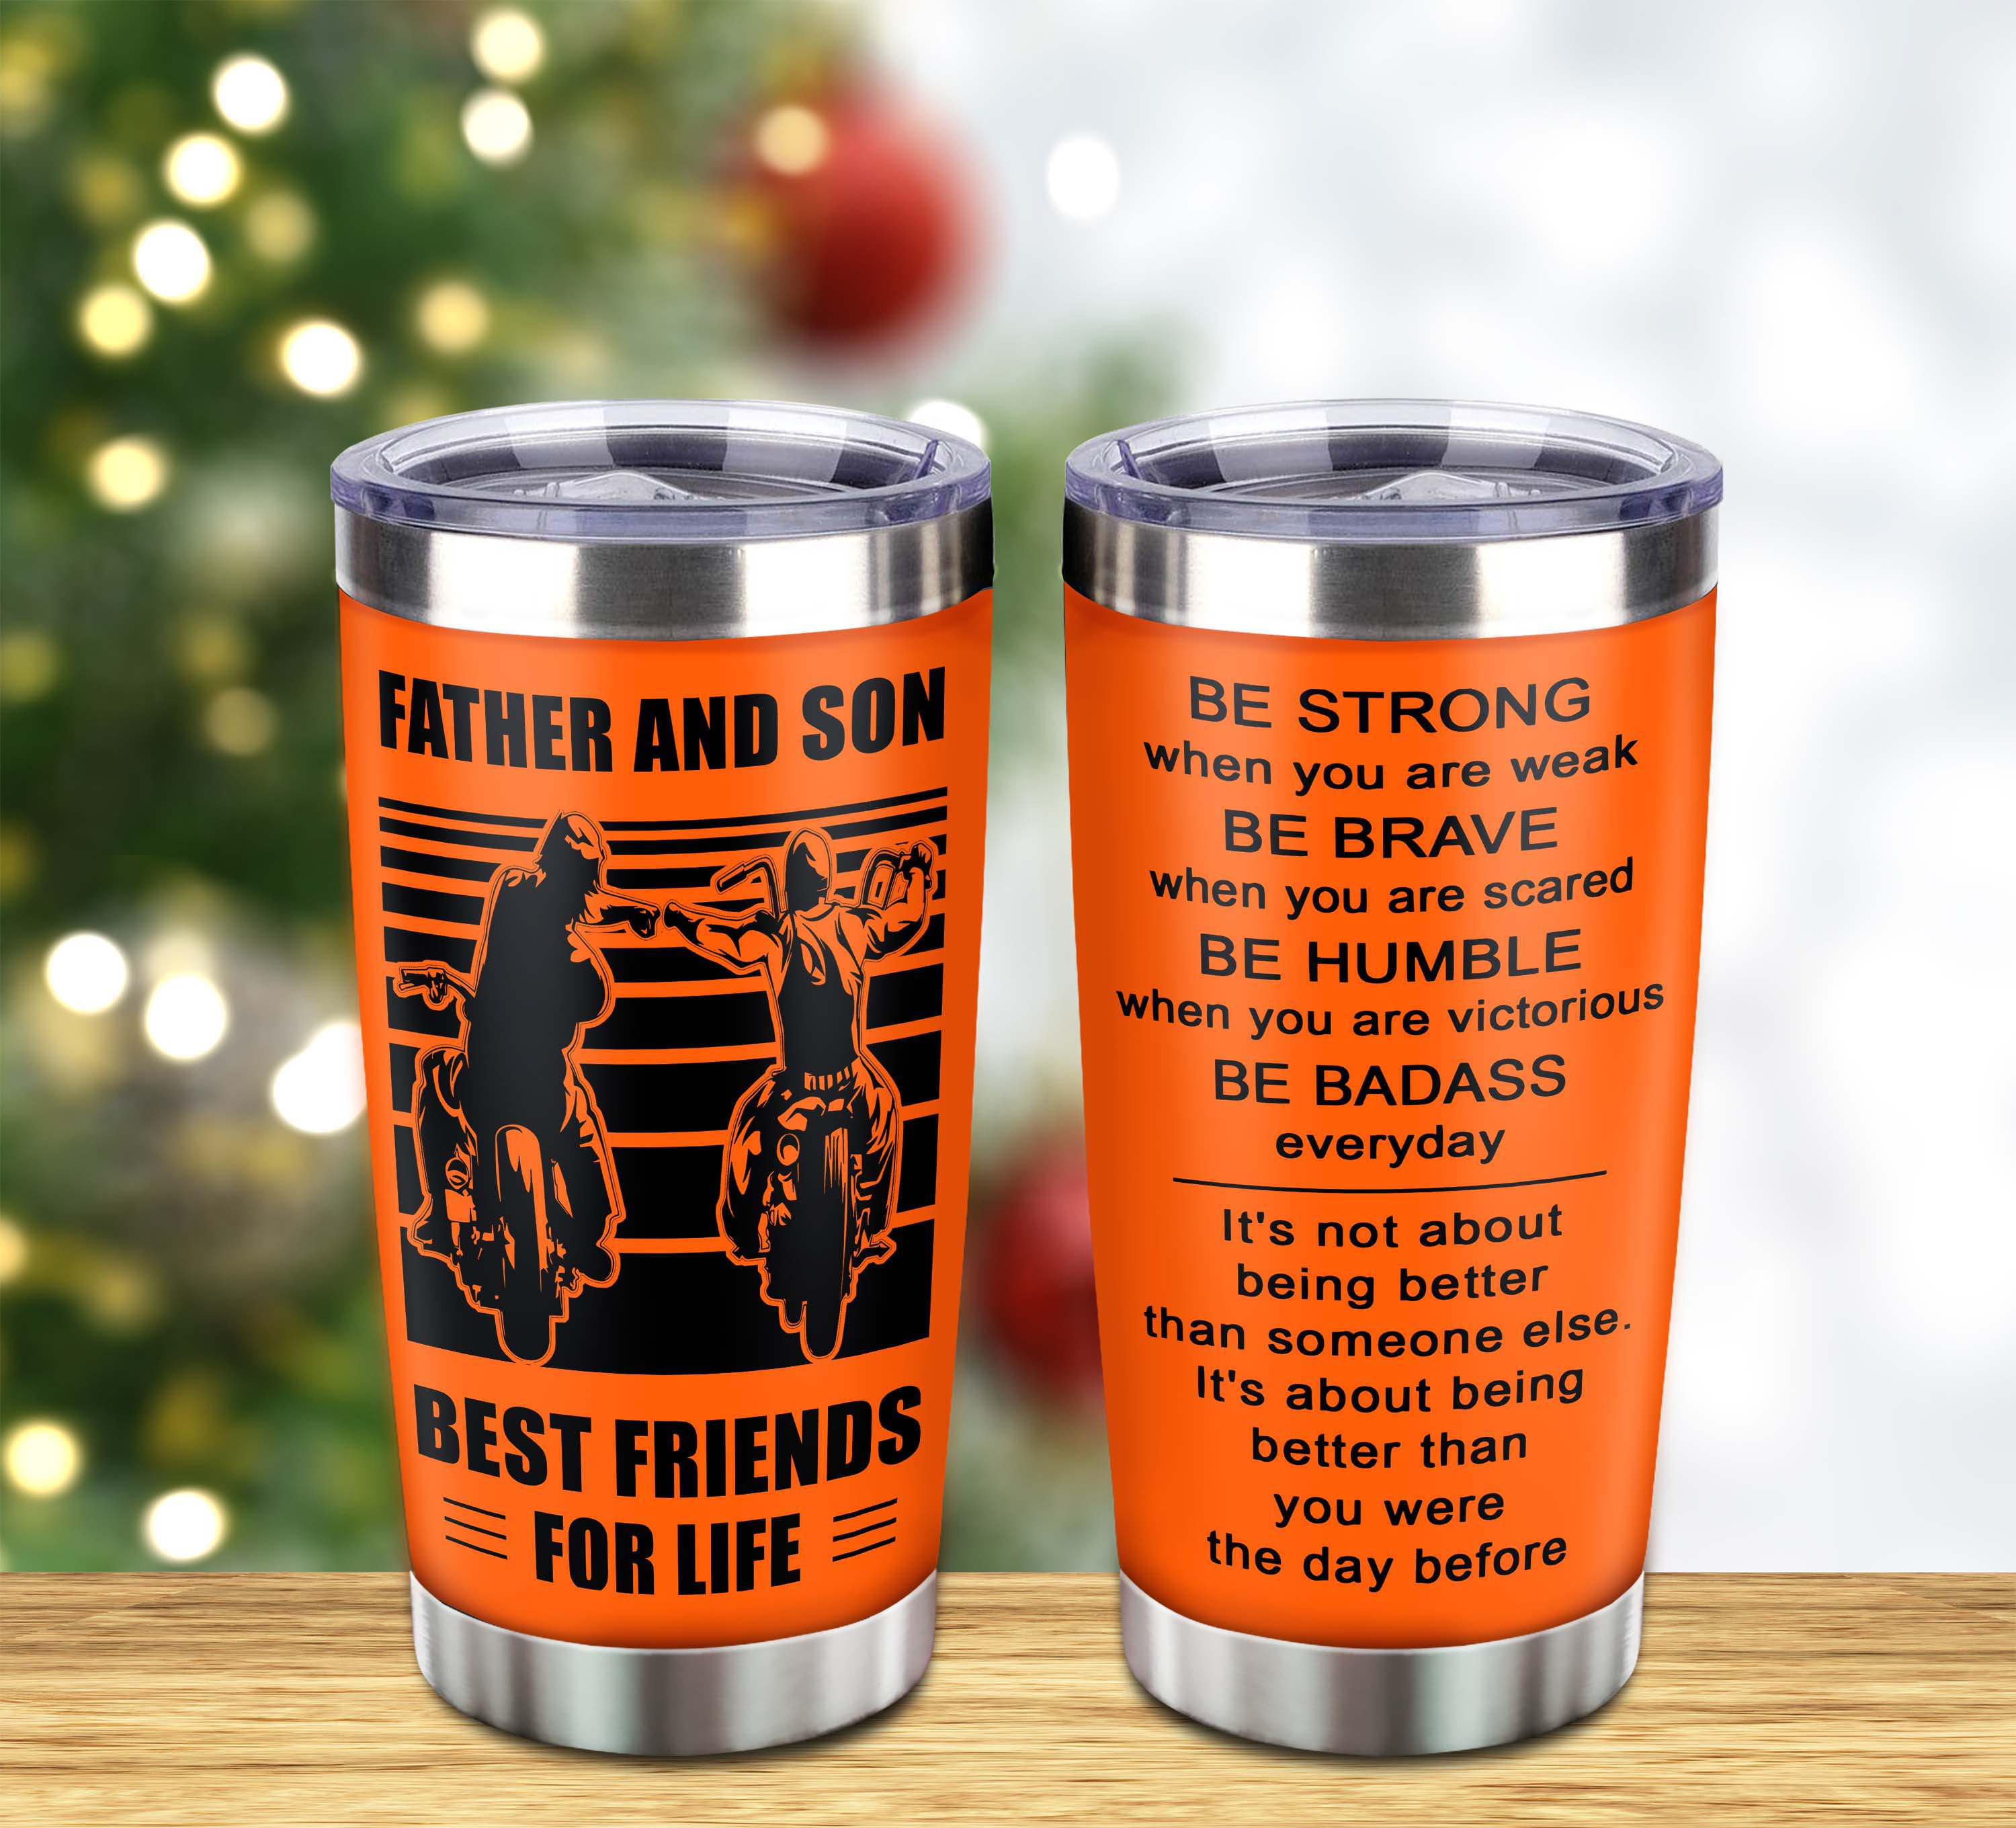 Customizable American Football Tumbler, Gifts From Dad To Son Father And Son Best Friend For Life With Inspriration Message